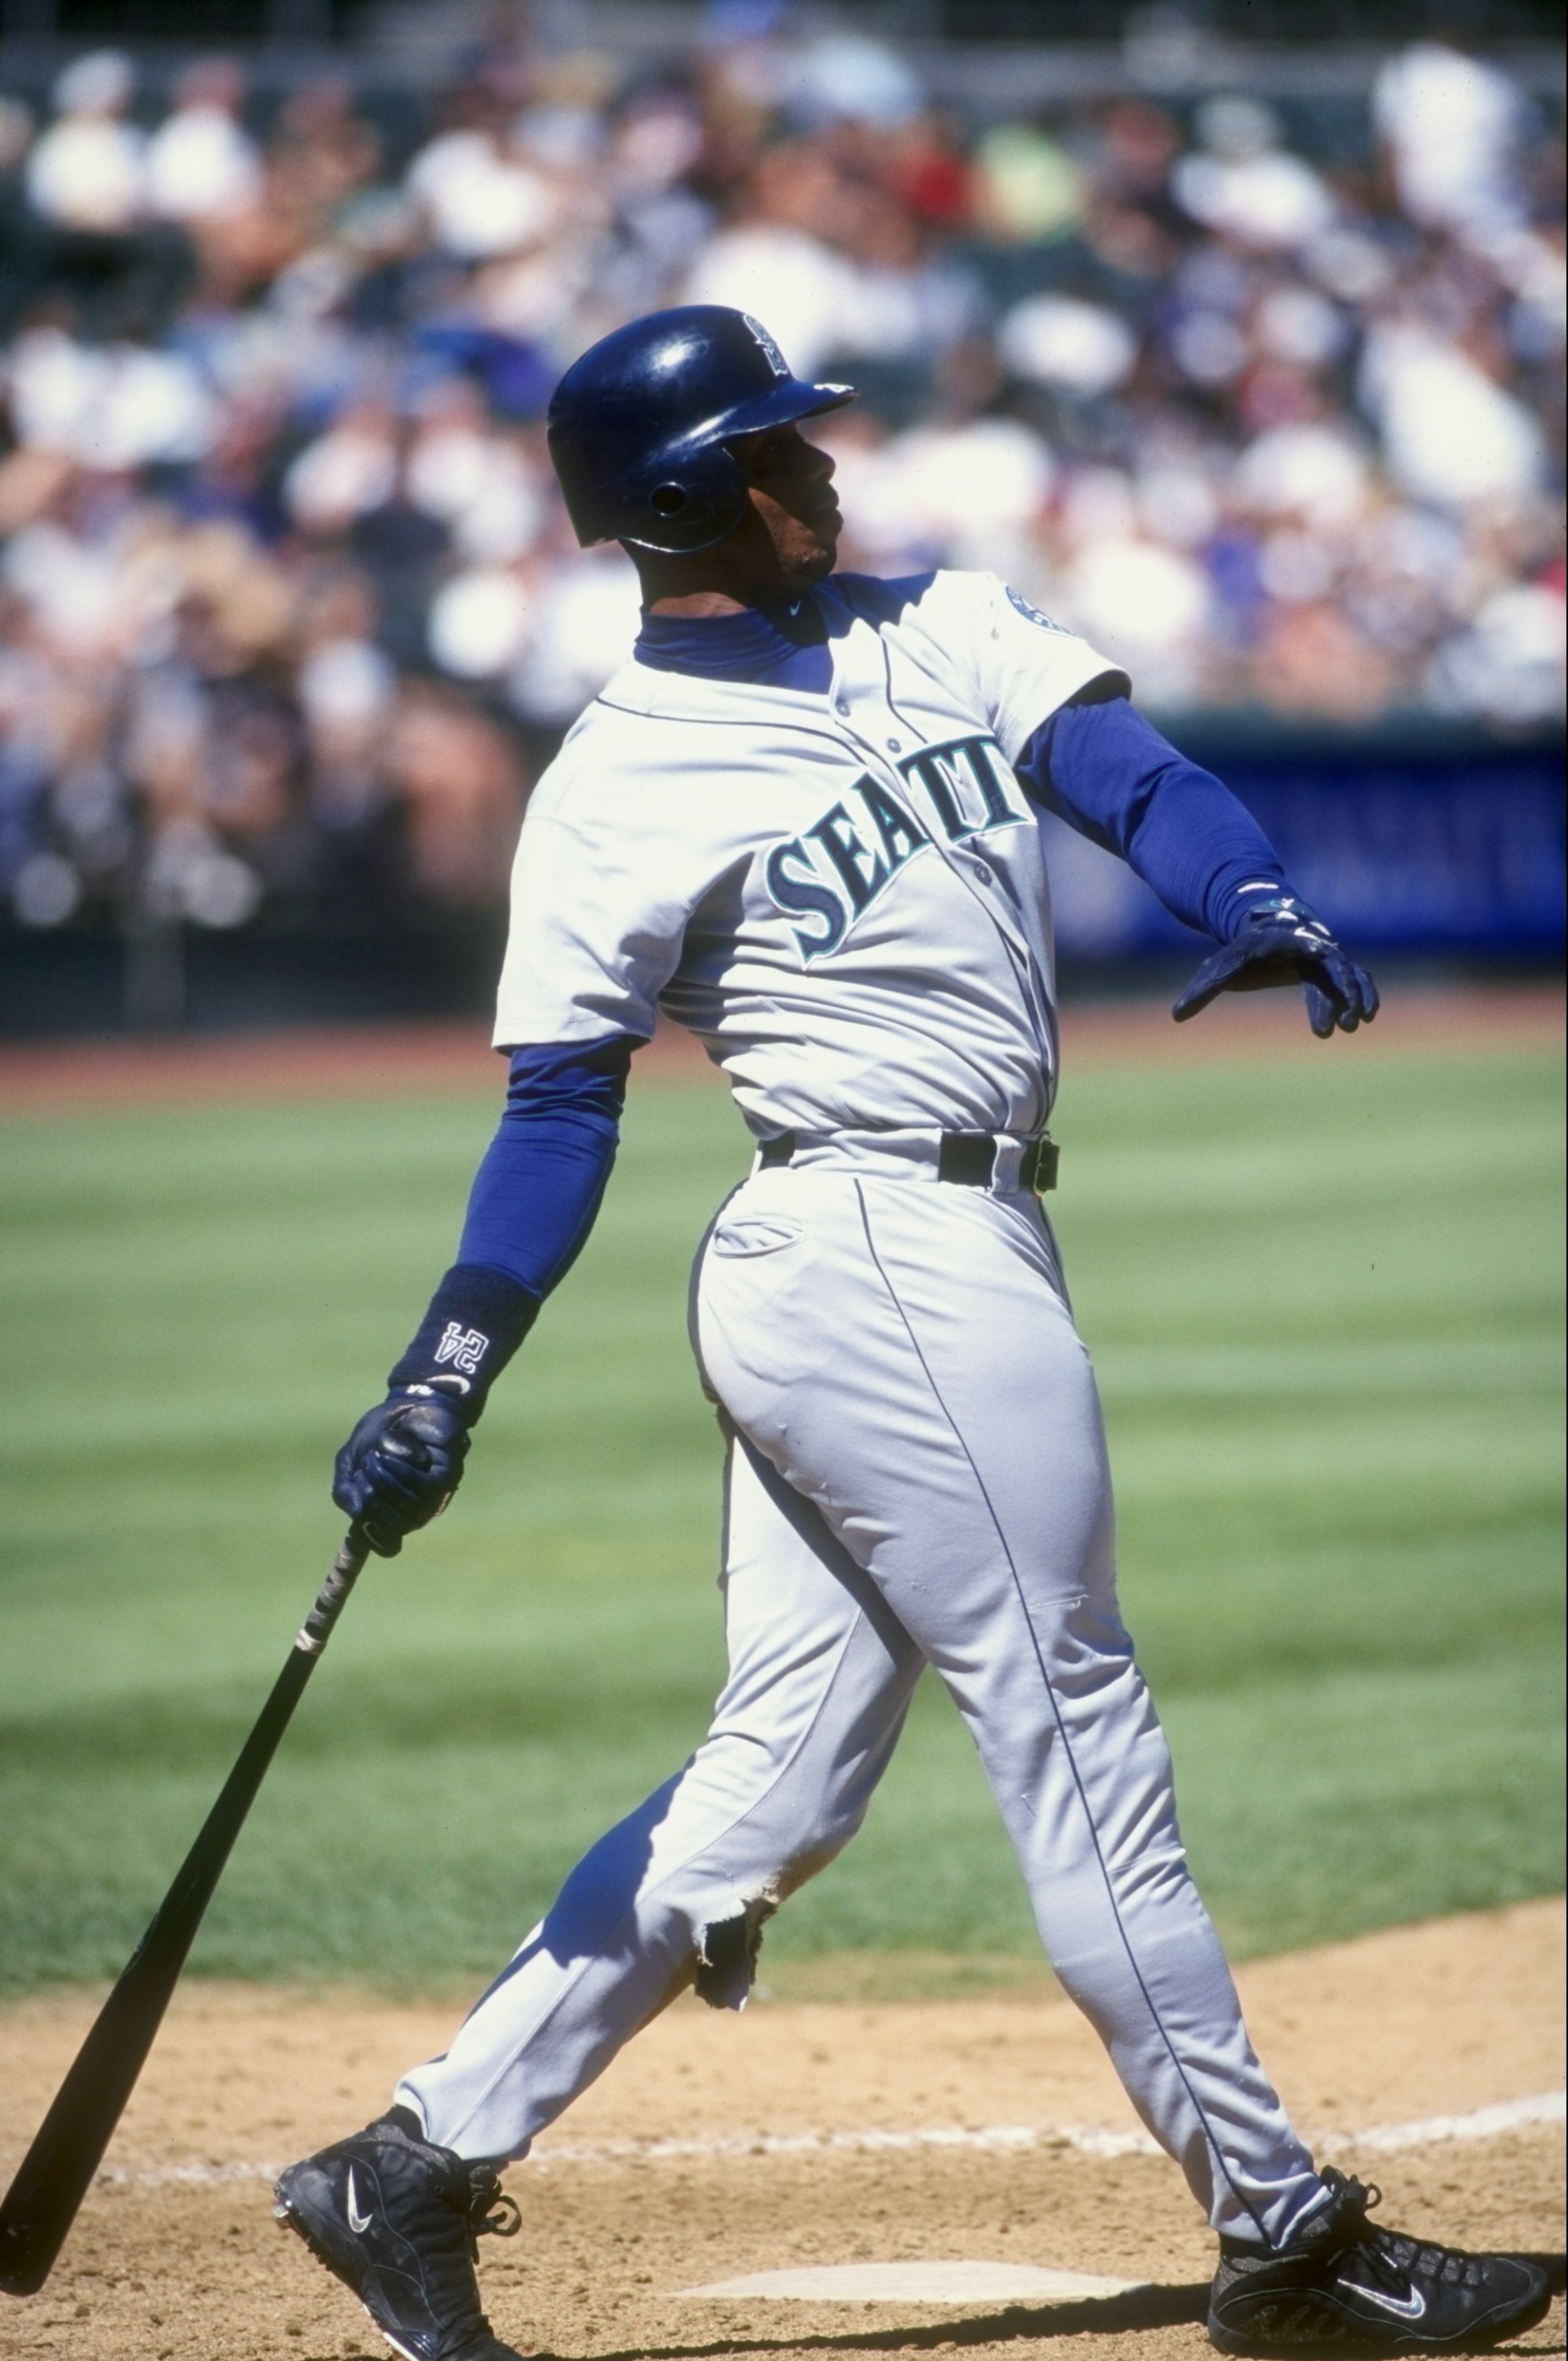 17 Sep 1998: Ken Griffey Jr. #24 of the Seattle Mariners drops his bat as he watches the ball fly during the game agianst the Oakland Athletics at Oakland Coliseum in Oakland, California. The Mariners defeated the A''s 8-0.